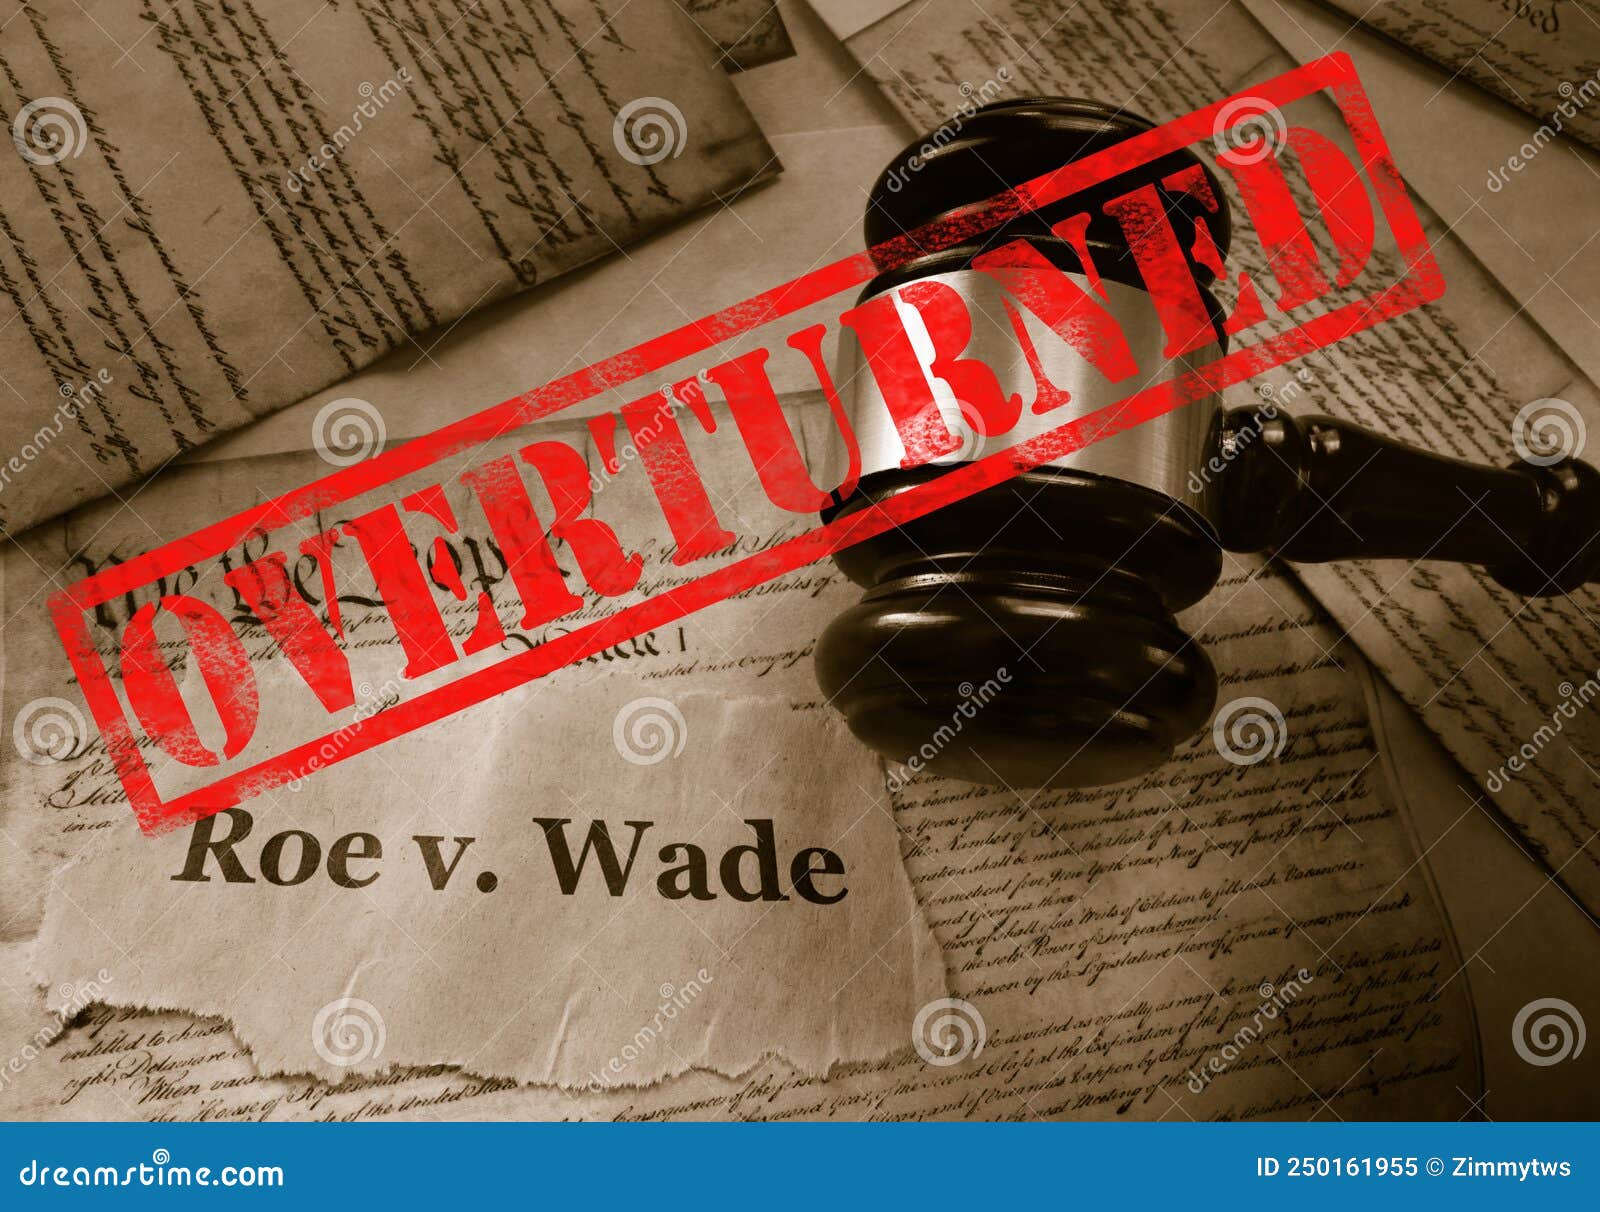 roe v wade news headline with gavel and overturned stamp on the united states constitution